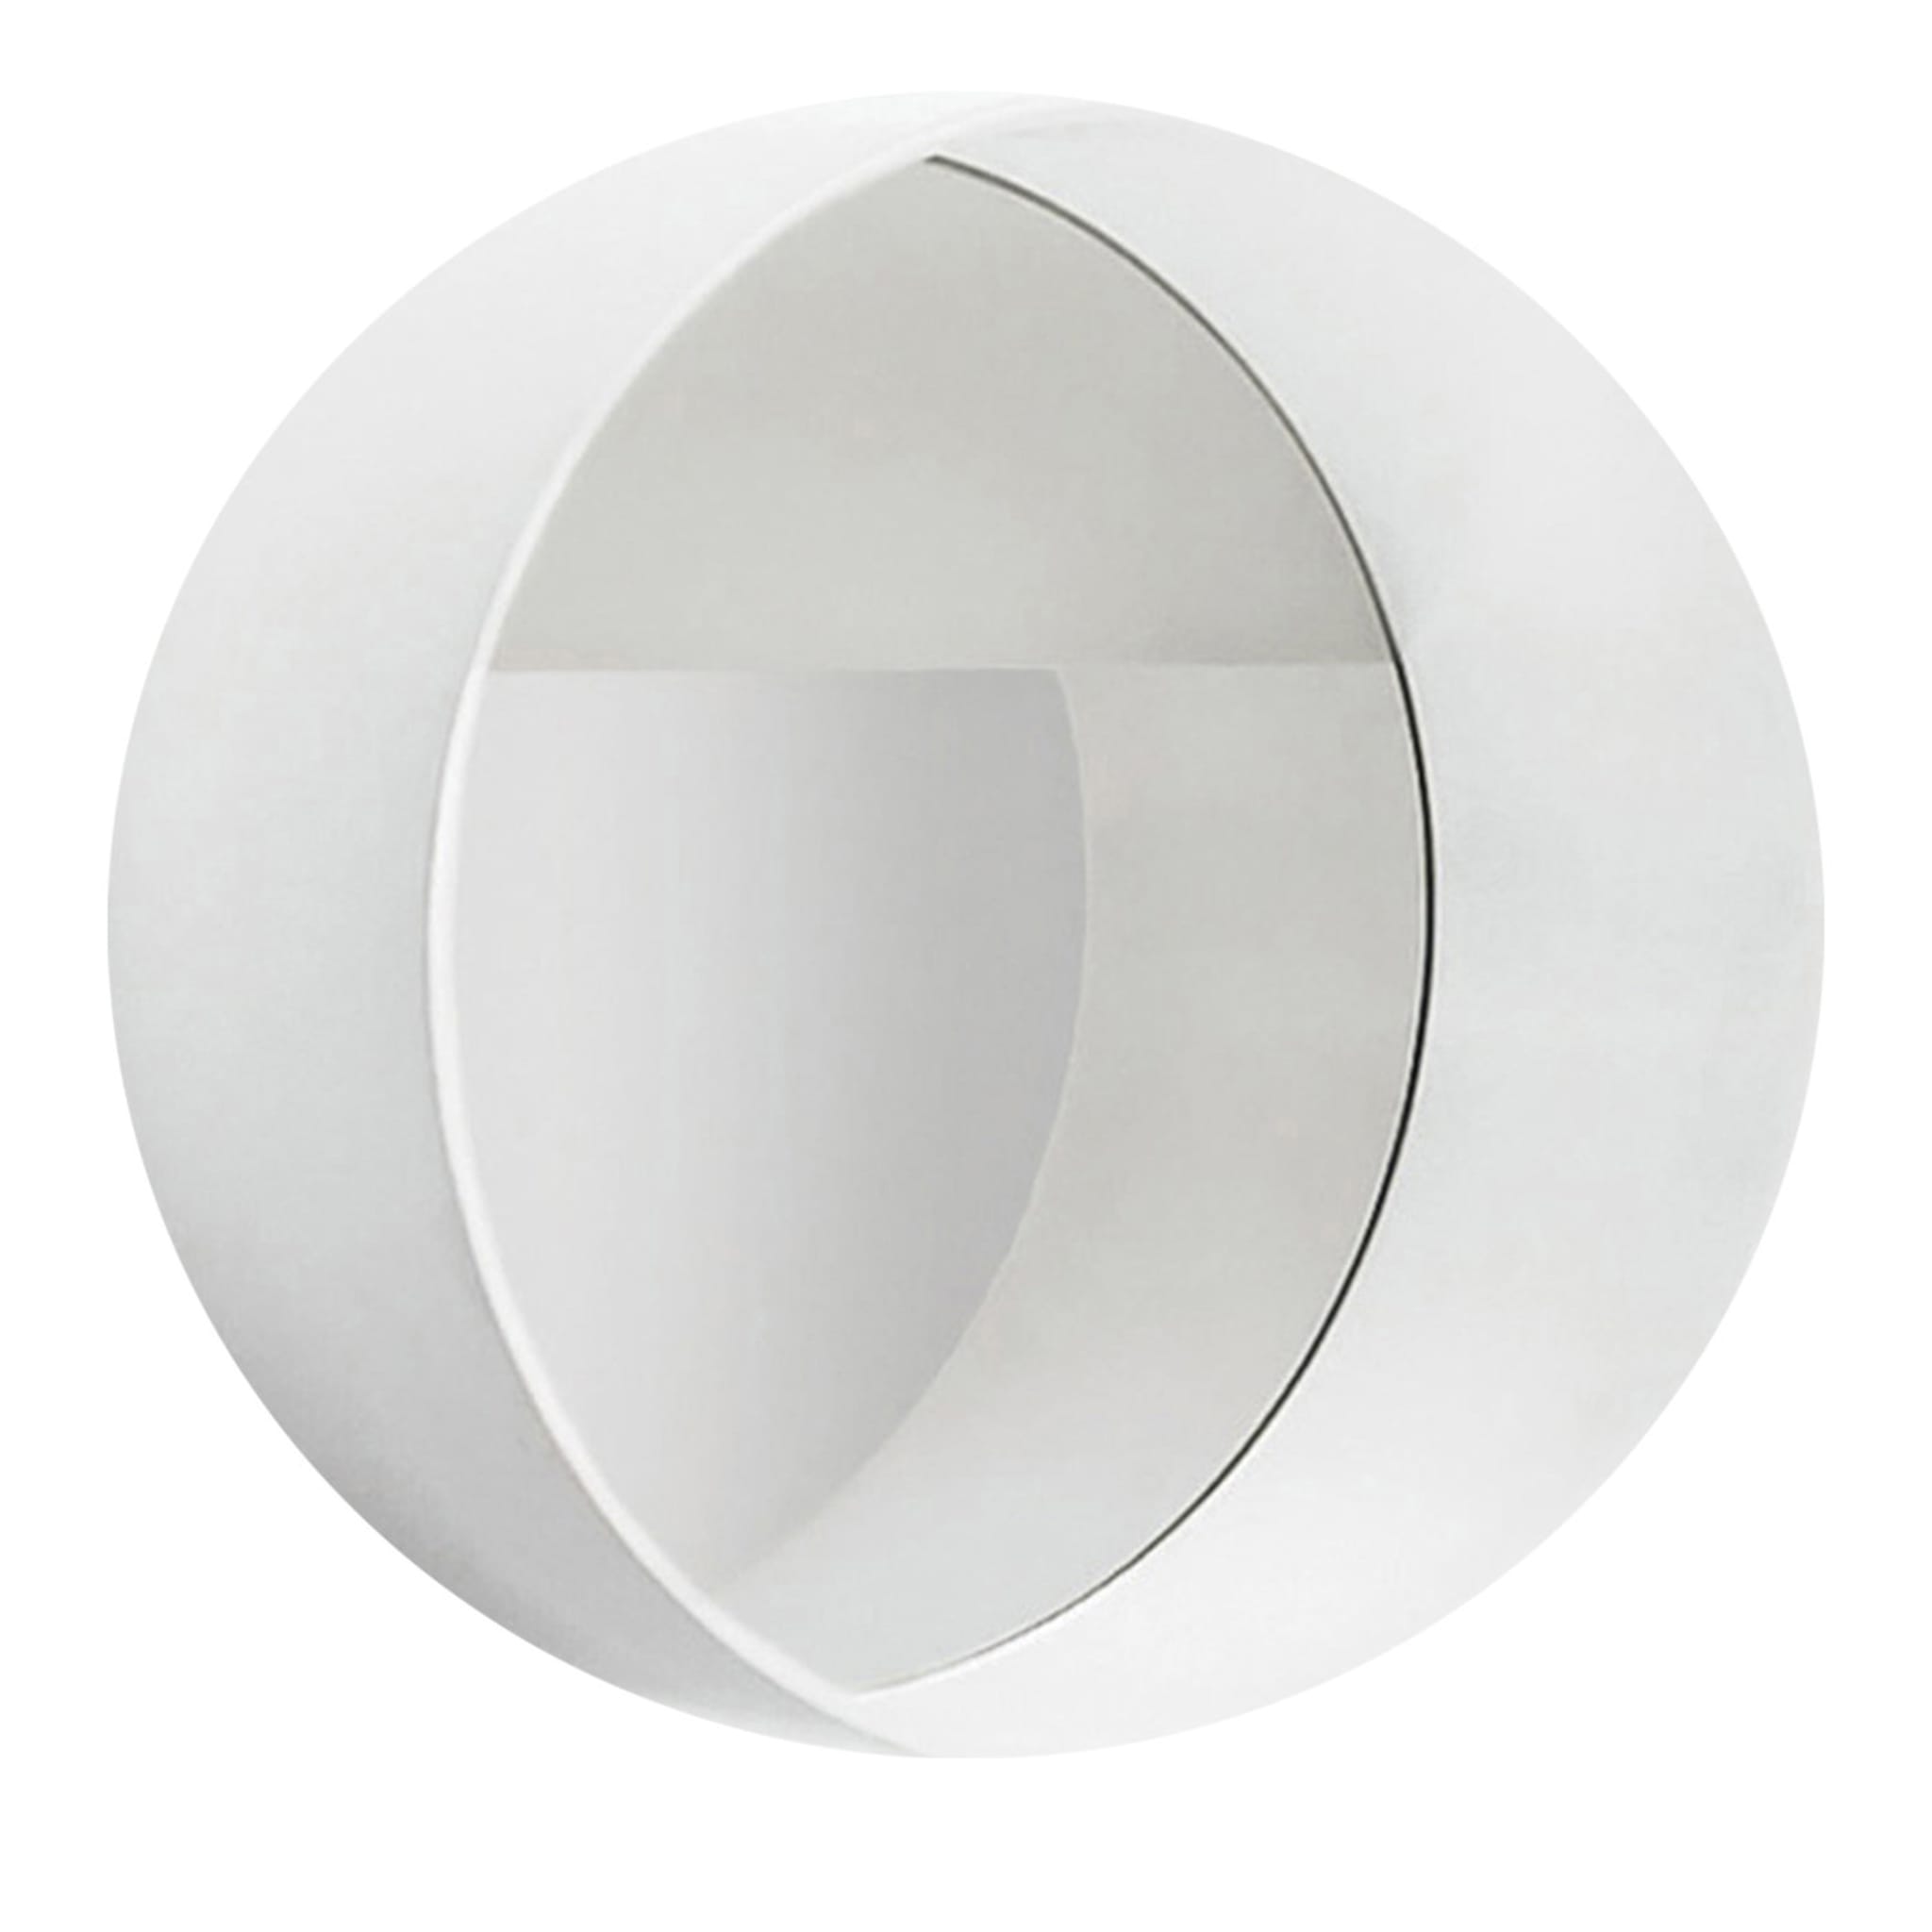 Horizon Linear Mirror with Silver Finish - Main view